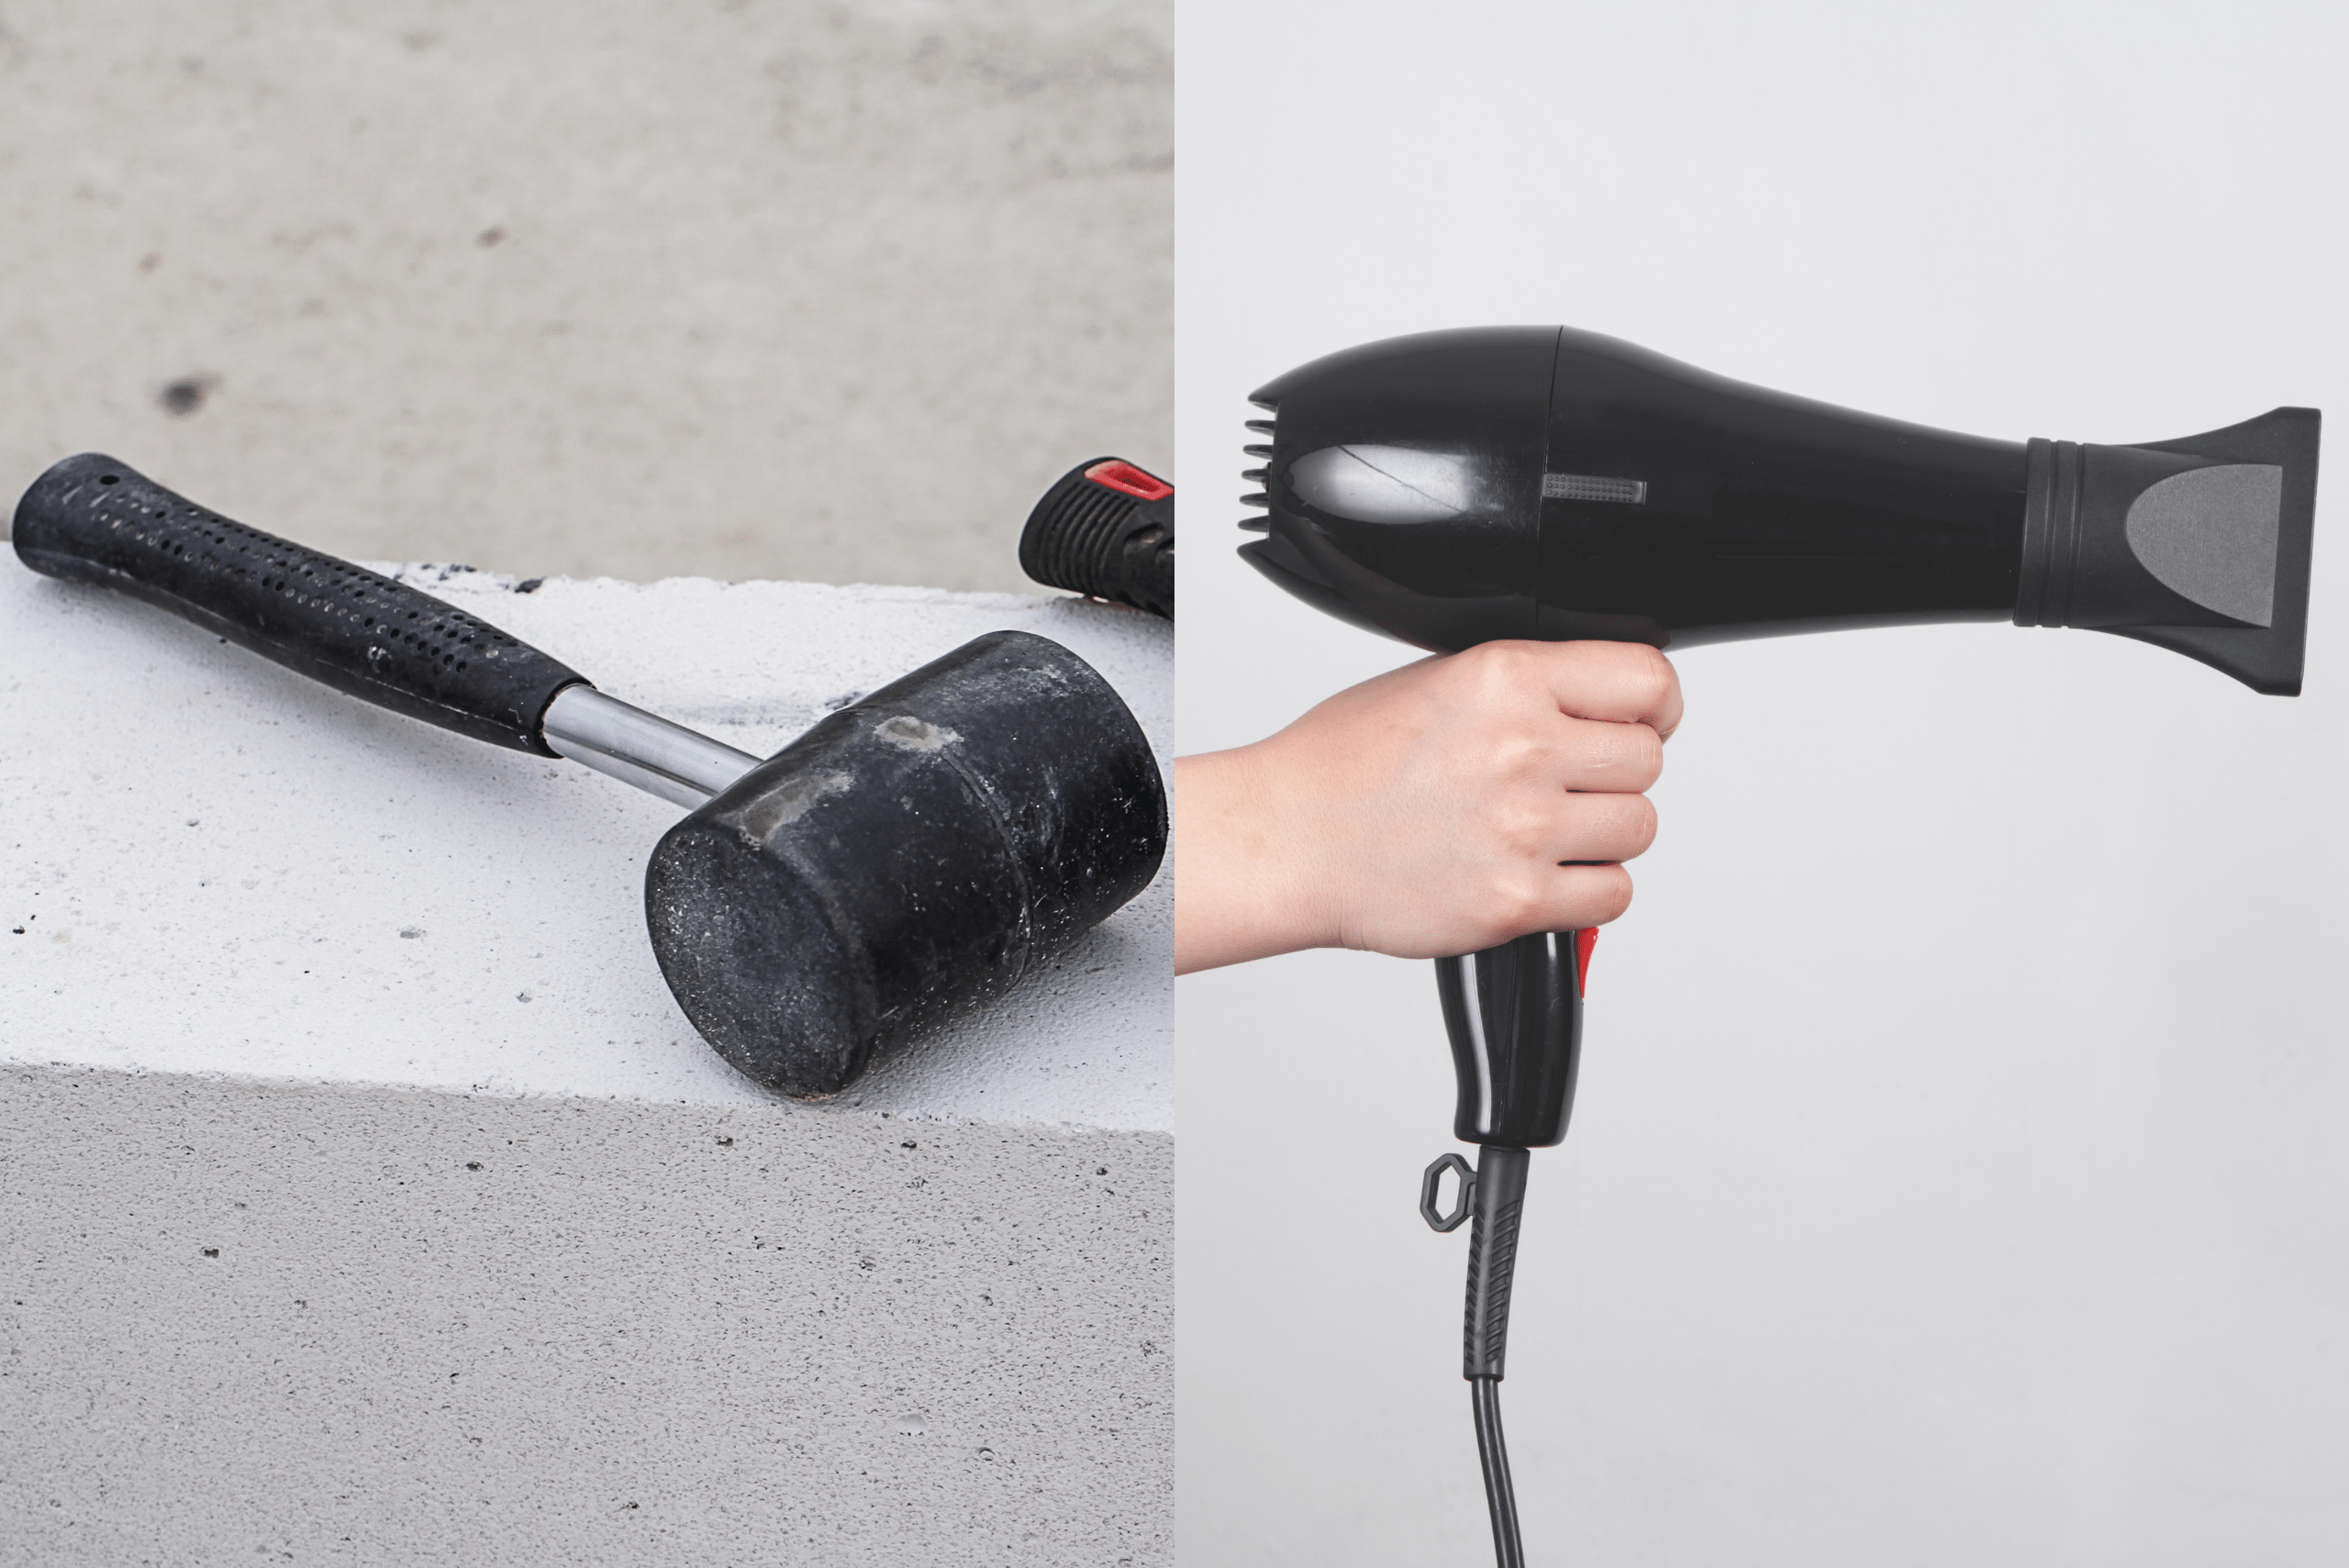 On the left a picture of a mallet and on the right is a hand holding a hair dryer.